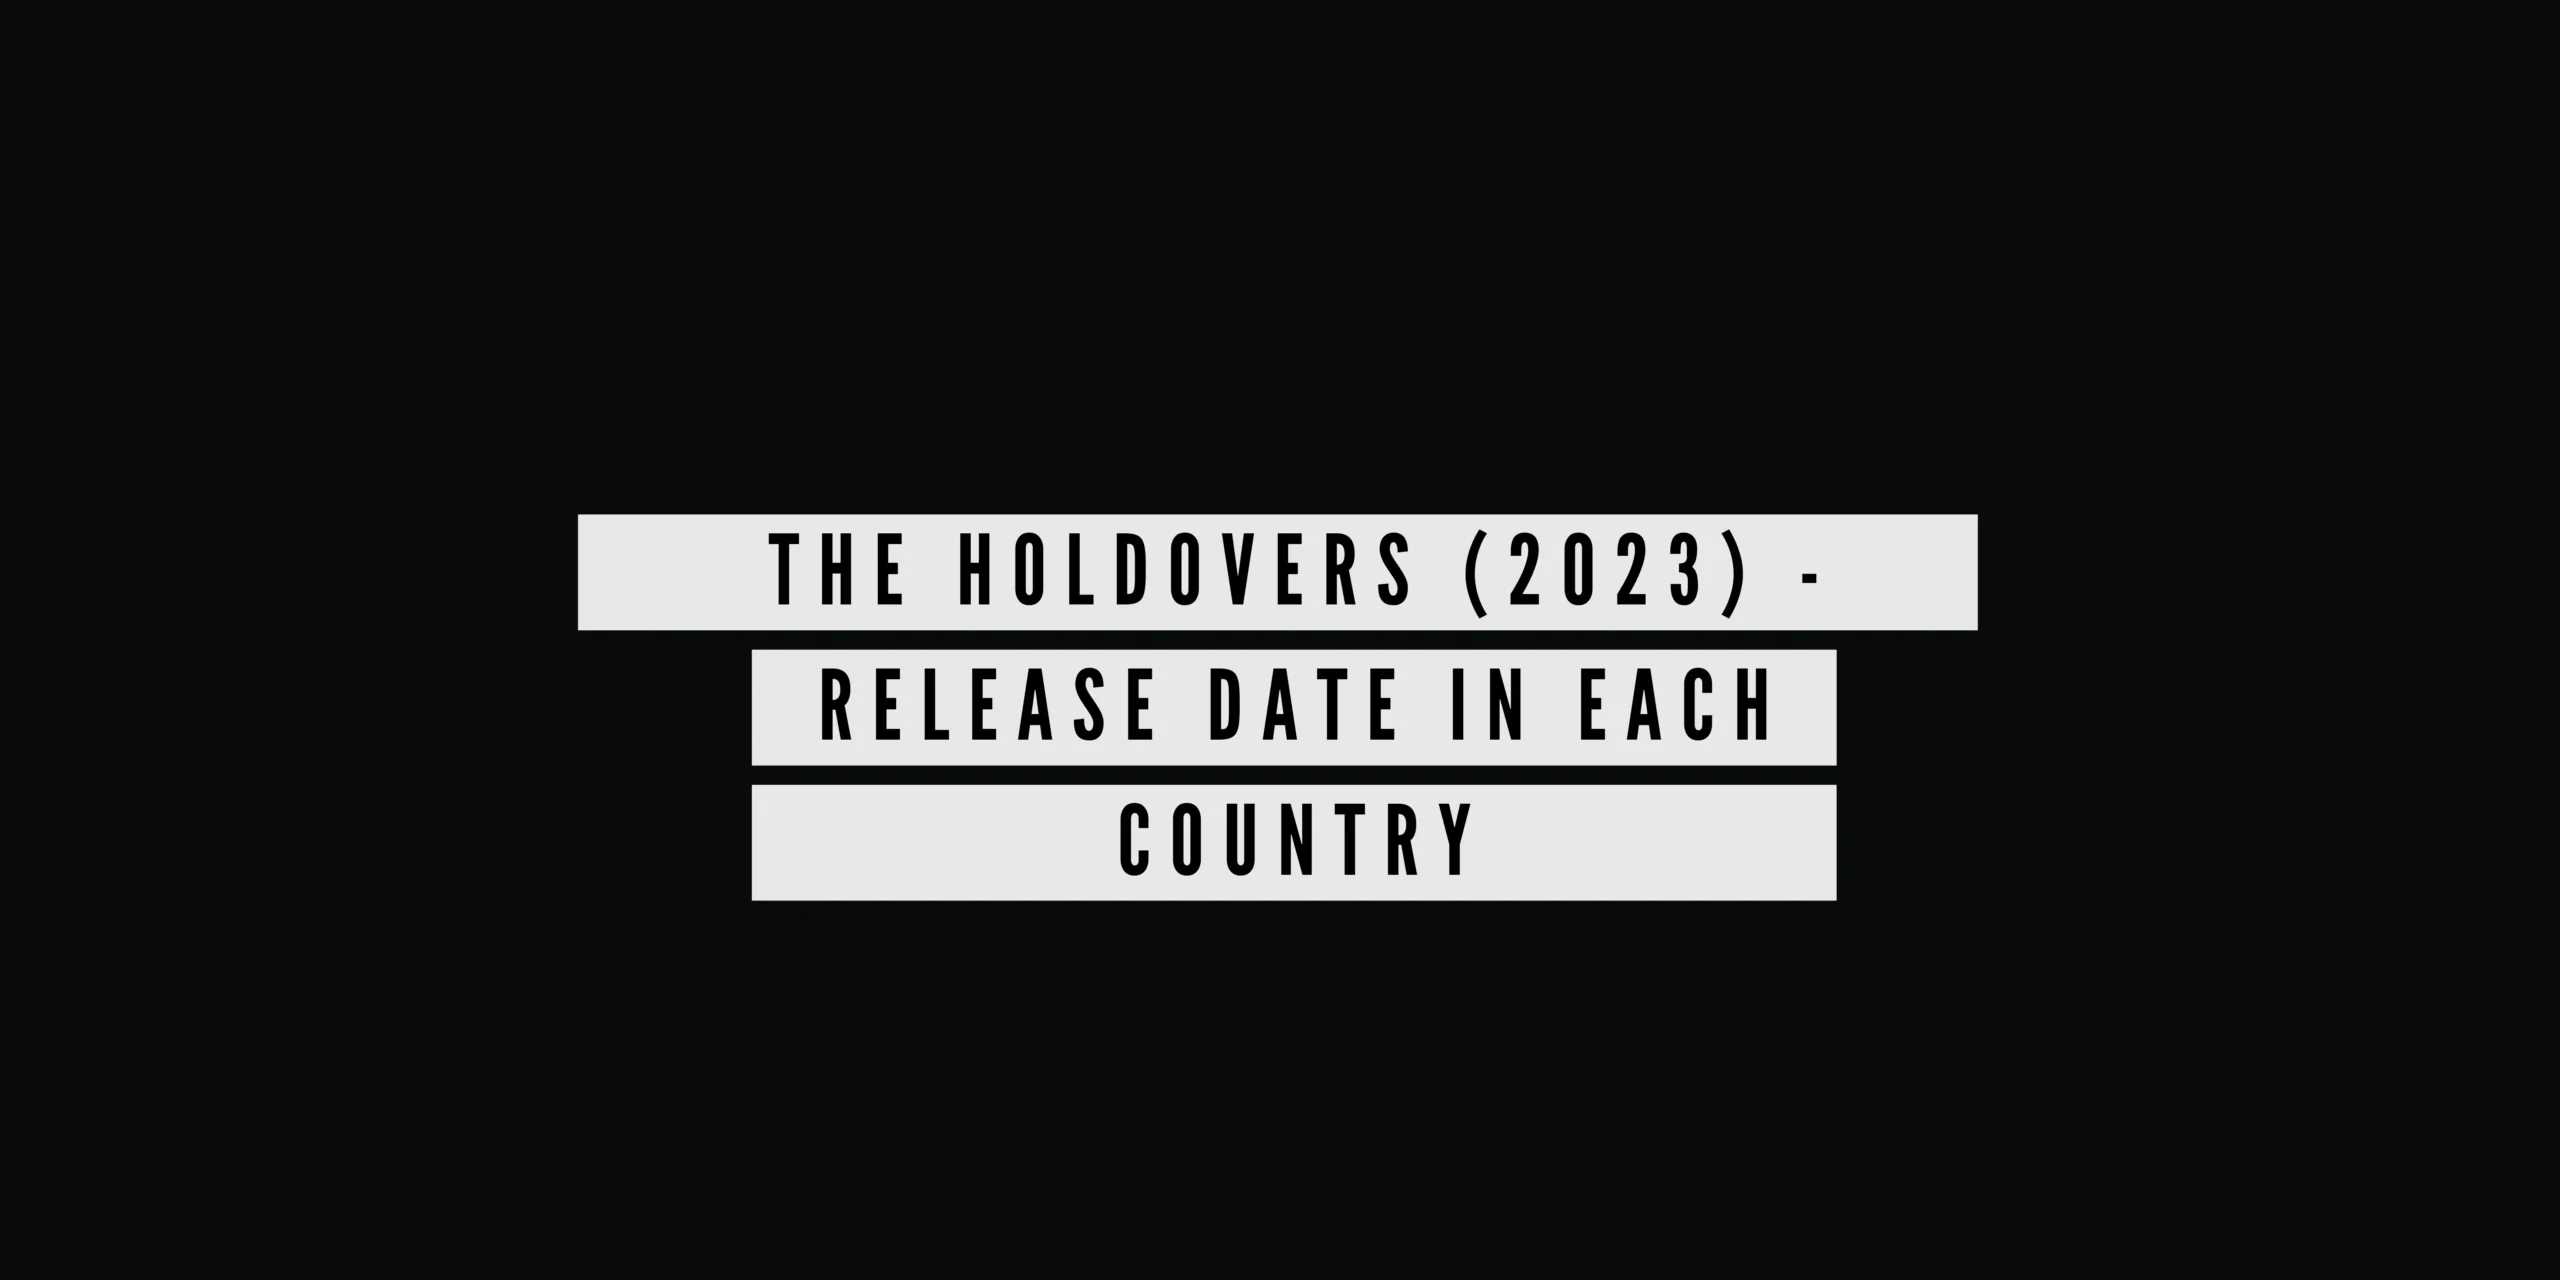 The Holdovers (2023) - Release Date In Each Country